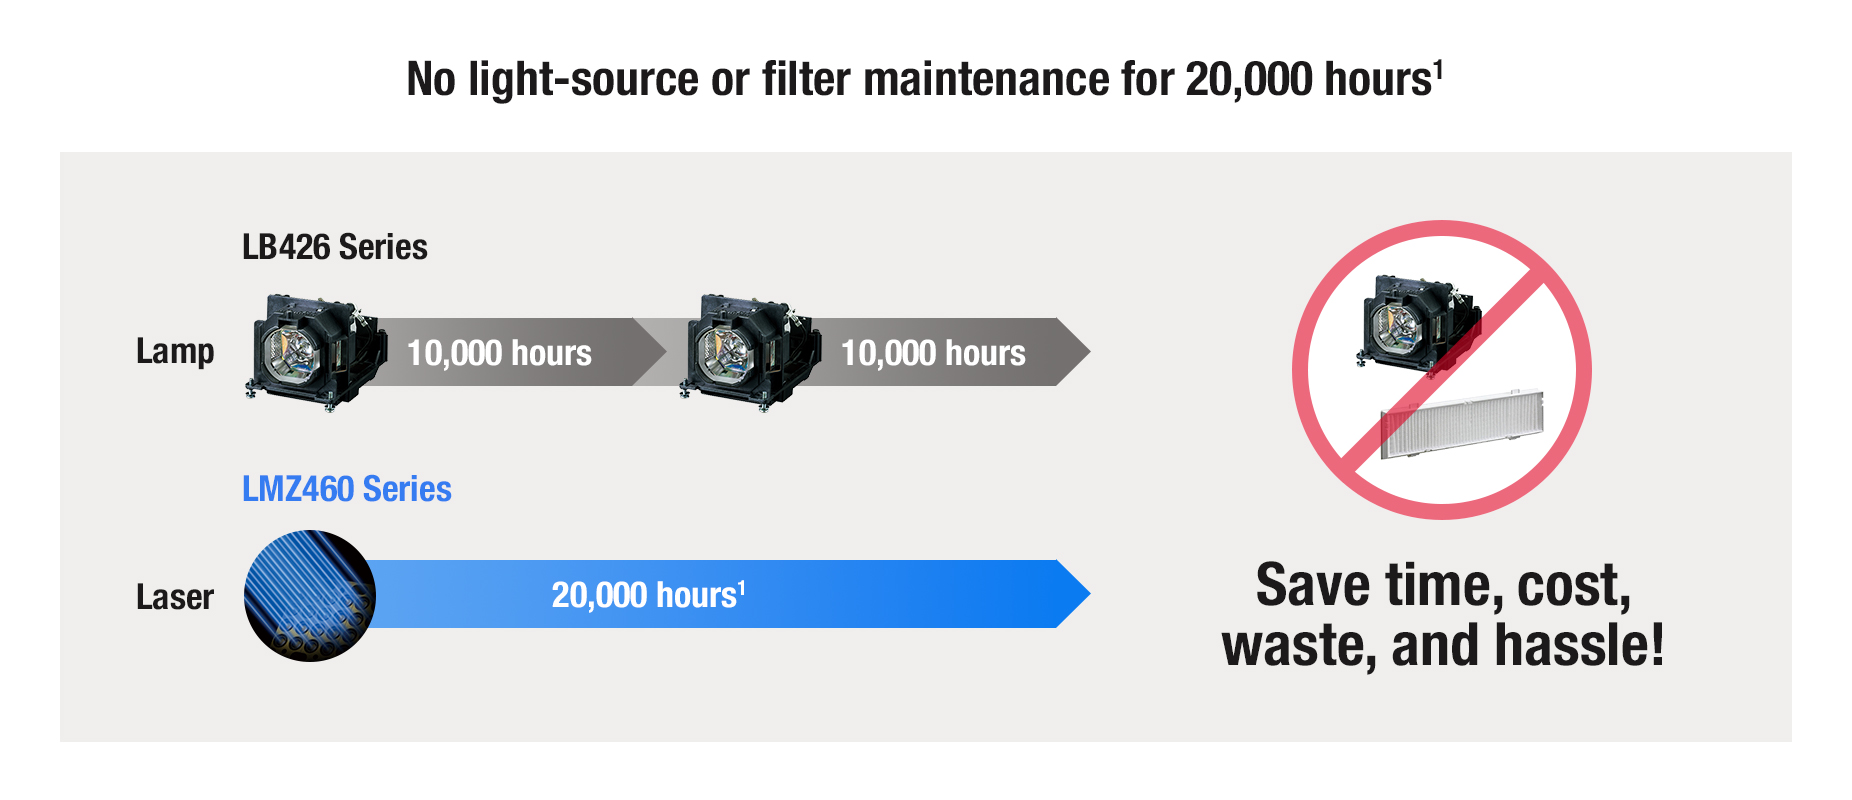 No light-source or filter maintenance for 20,000 hours